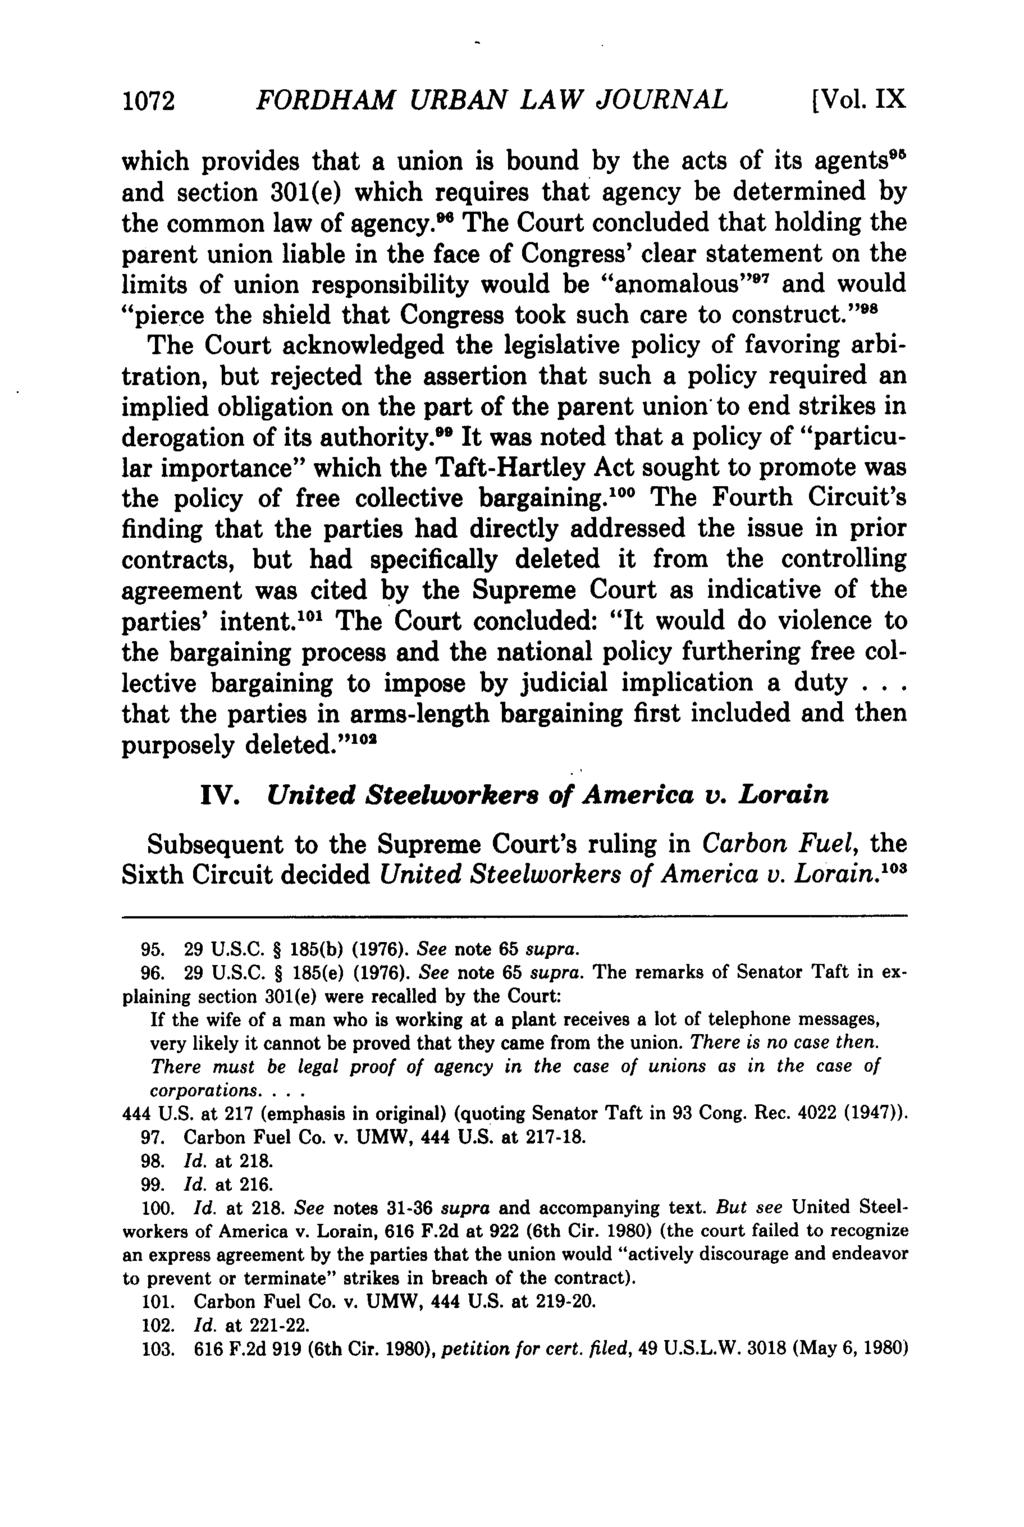 1072 FORDHAM URBAN LAW JOURNAL [Vol. IX which provides that a union is bound by the acts of its agents" and section 301(e) which requires that agency be determined by the common law of agency.